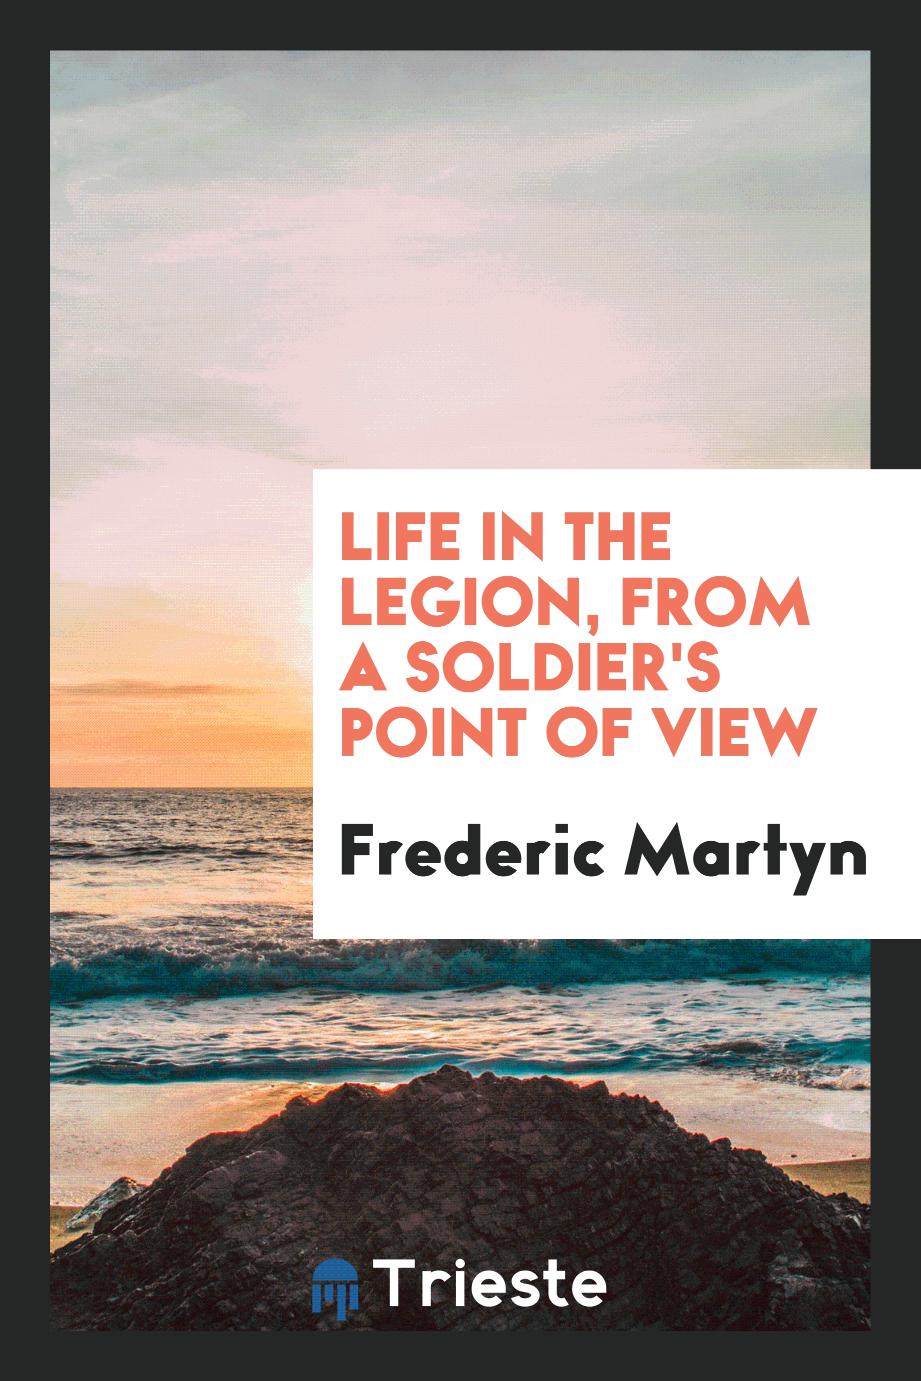 Life in the Legion, from a soldier's point of view